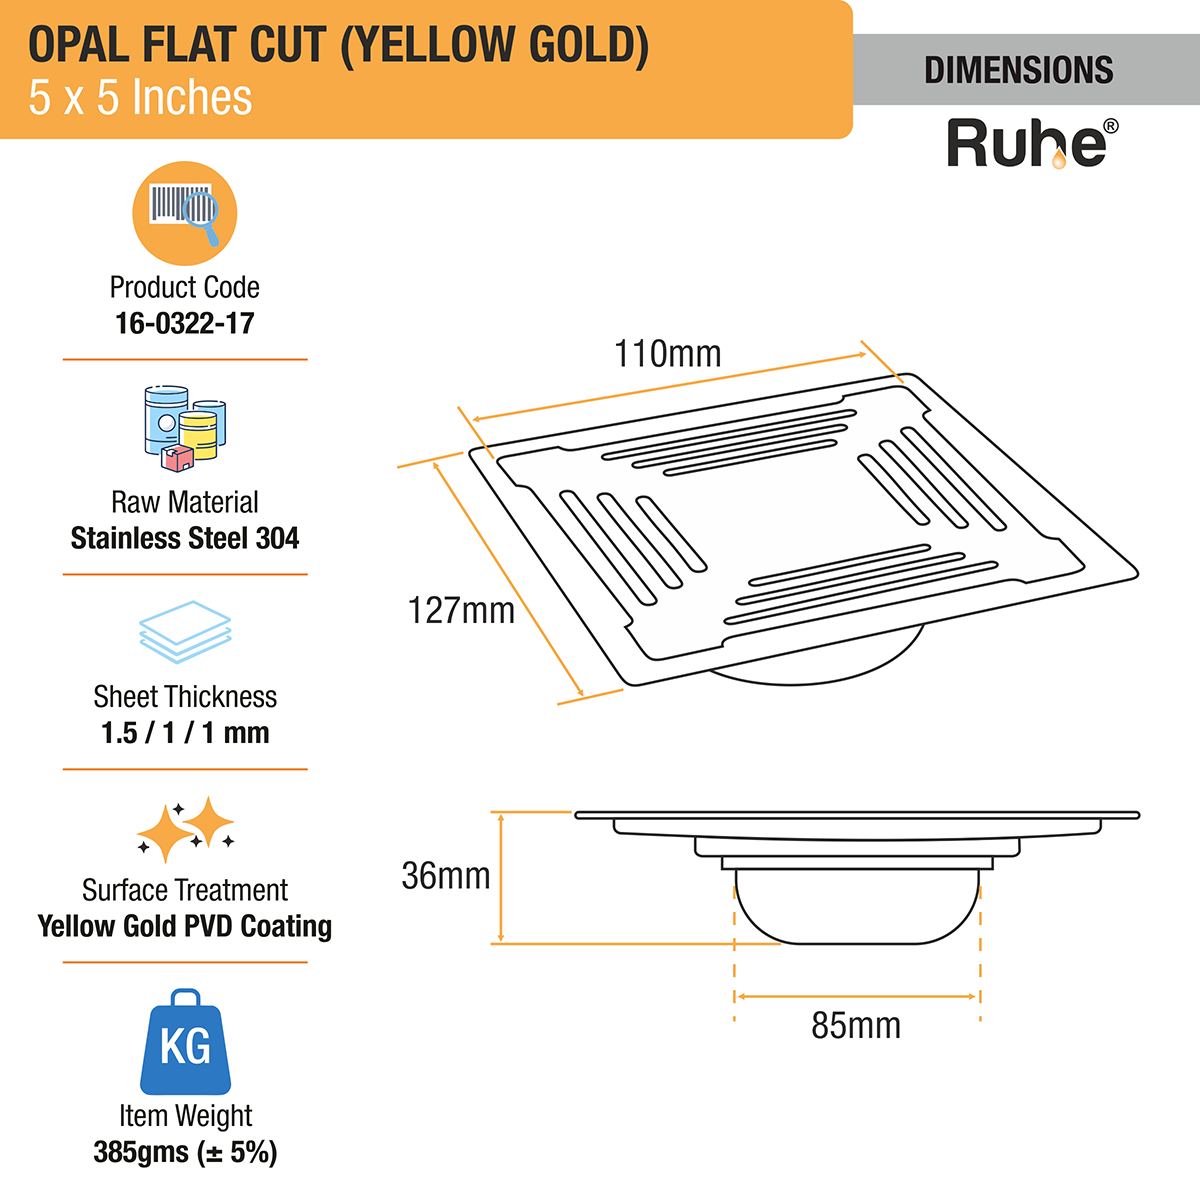 Opal Square Flat Cut Floor Drain in Yellow Gold PVD Coating (5 x 5 Inches) dimensions and sizes